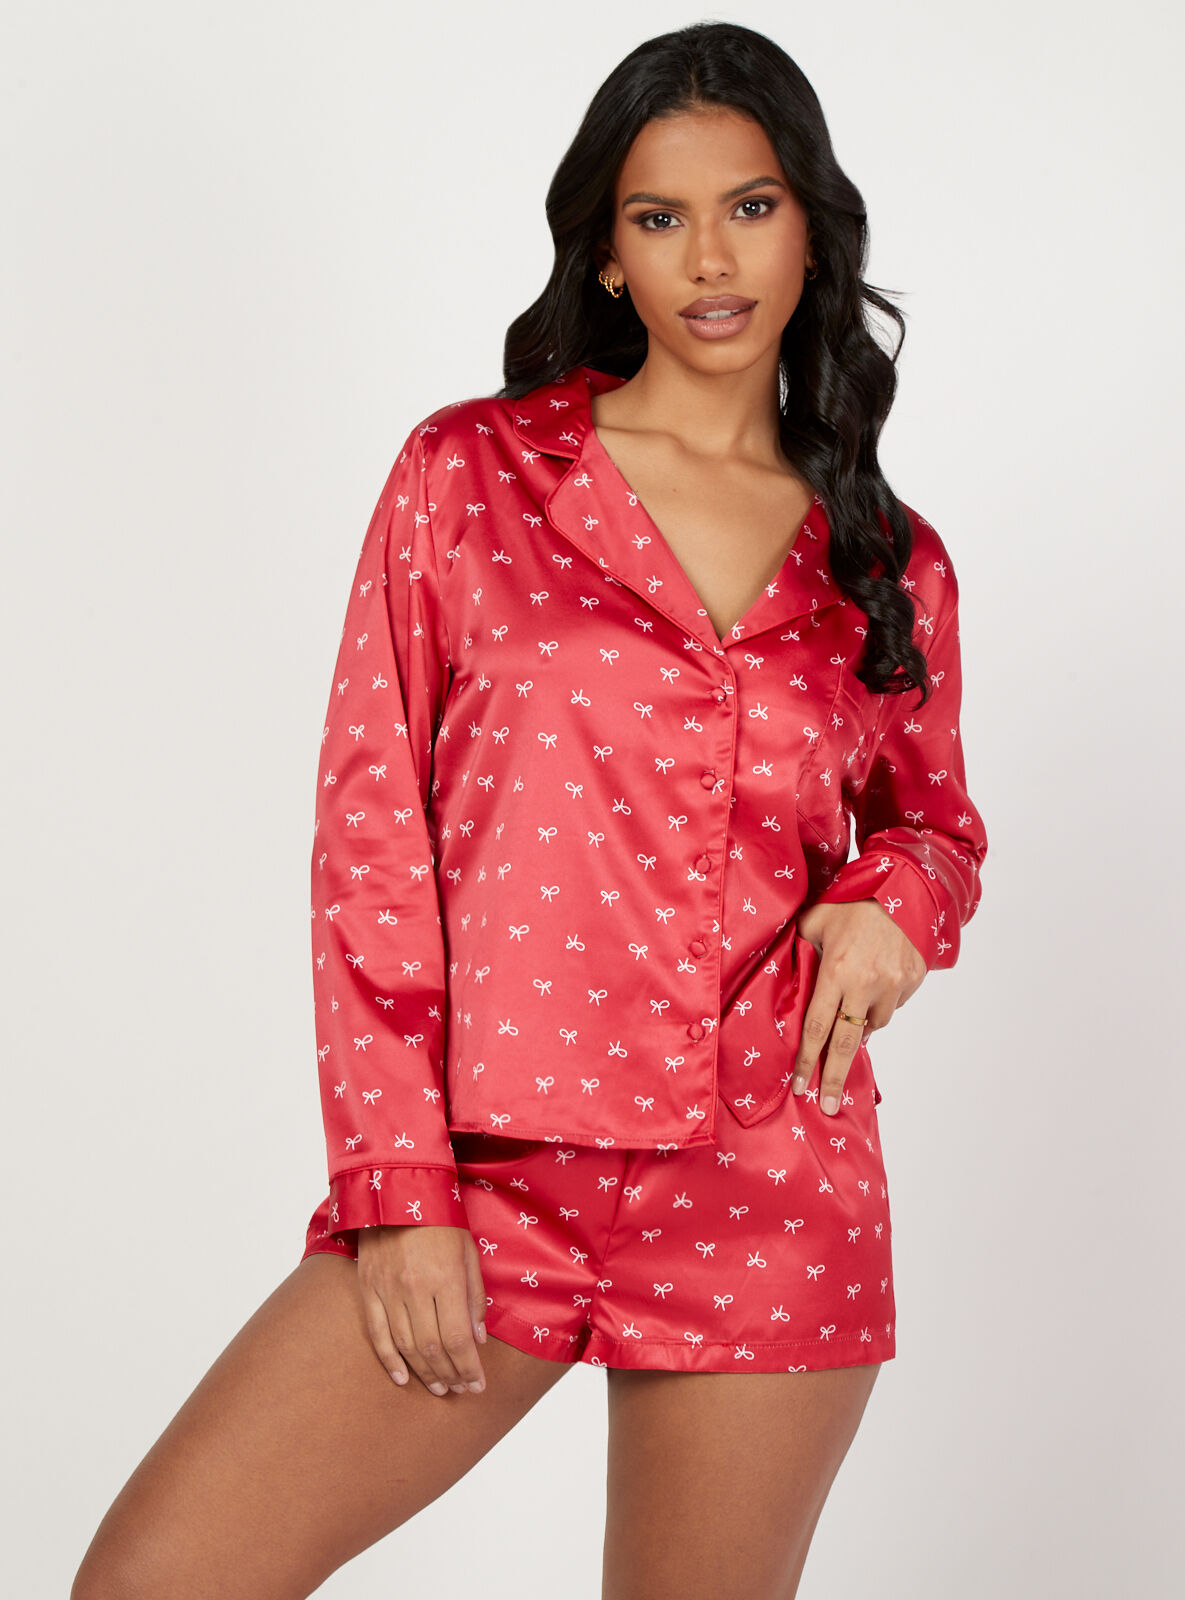 Boux Avenue Bow print satin revere and shorts set - Red Mix - 06